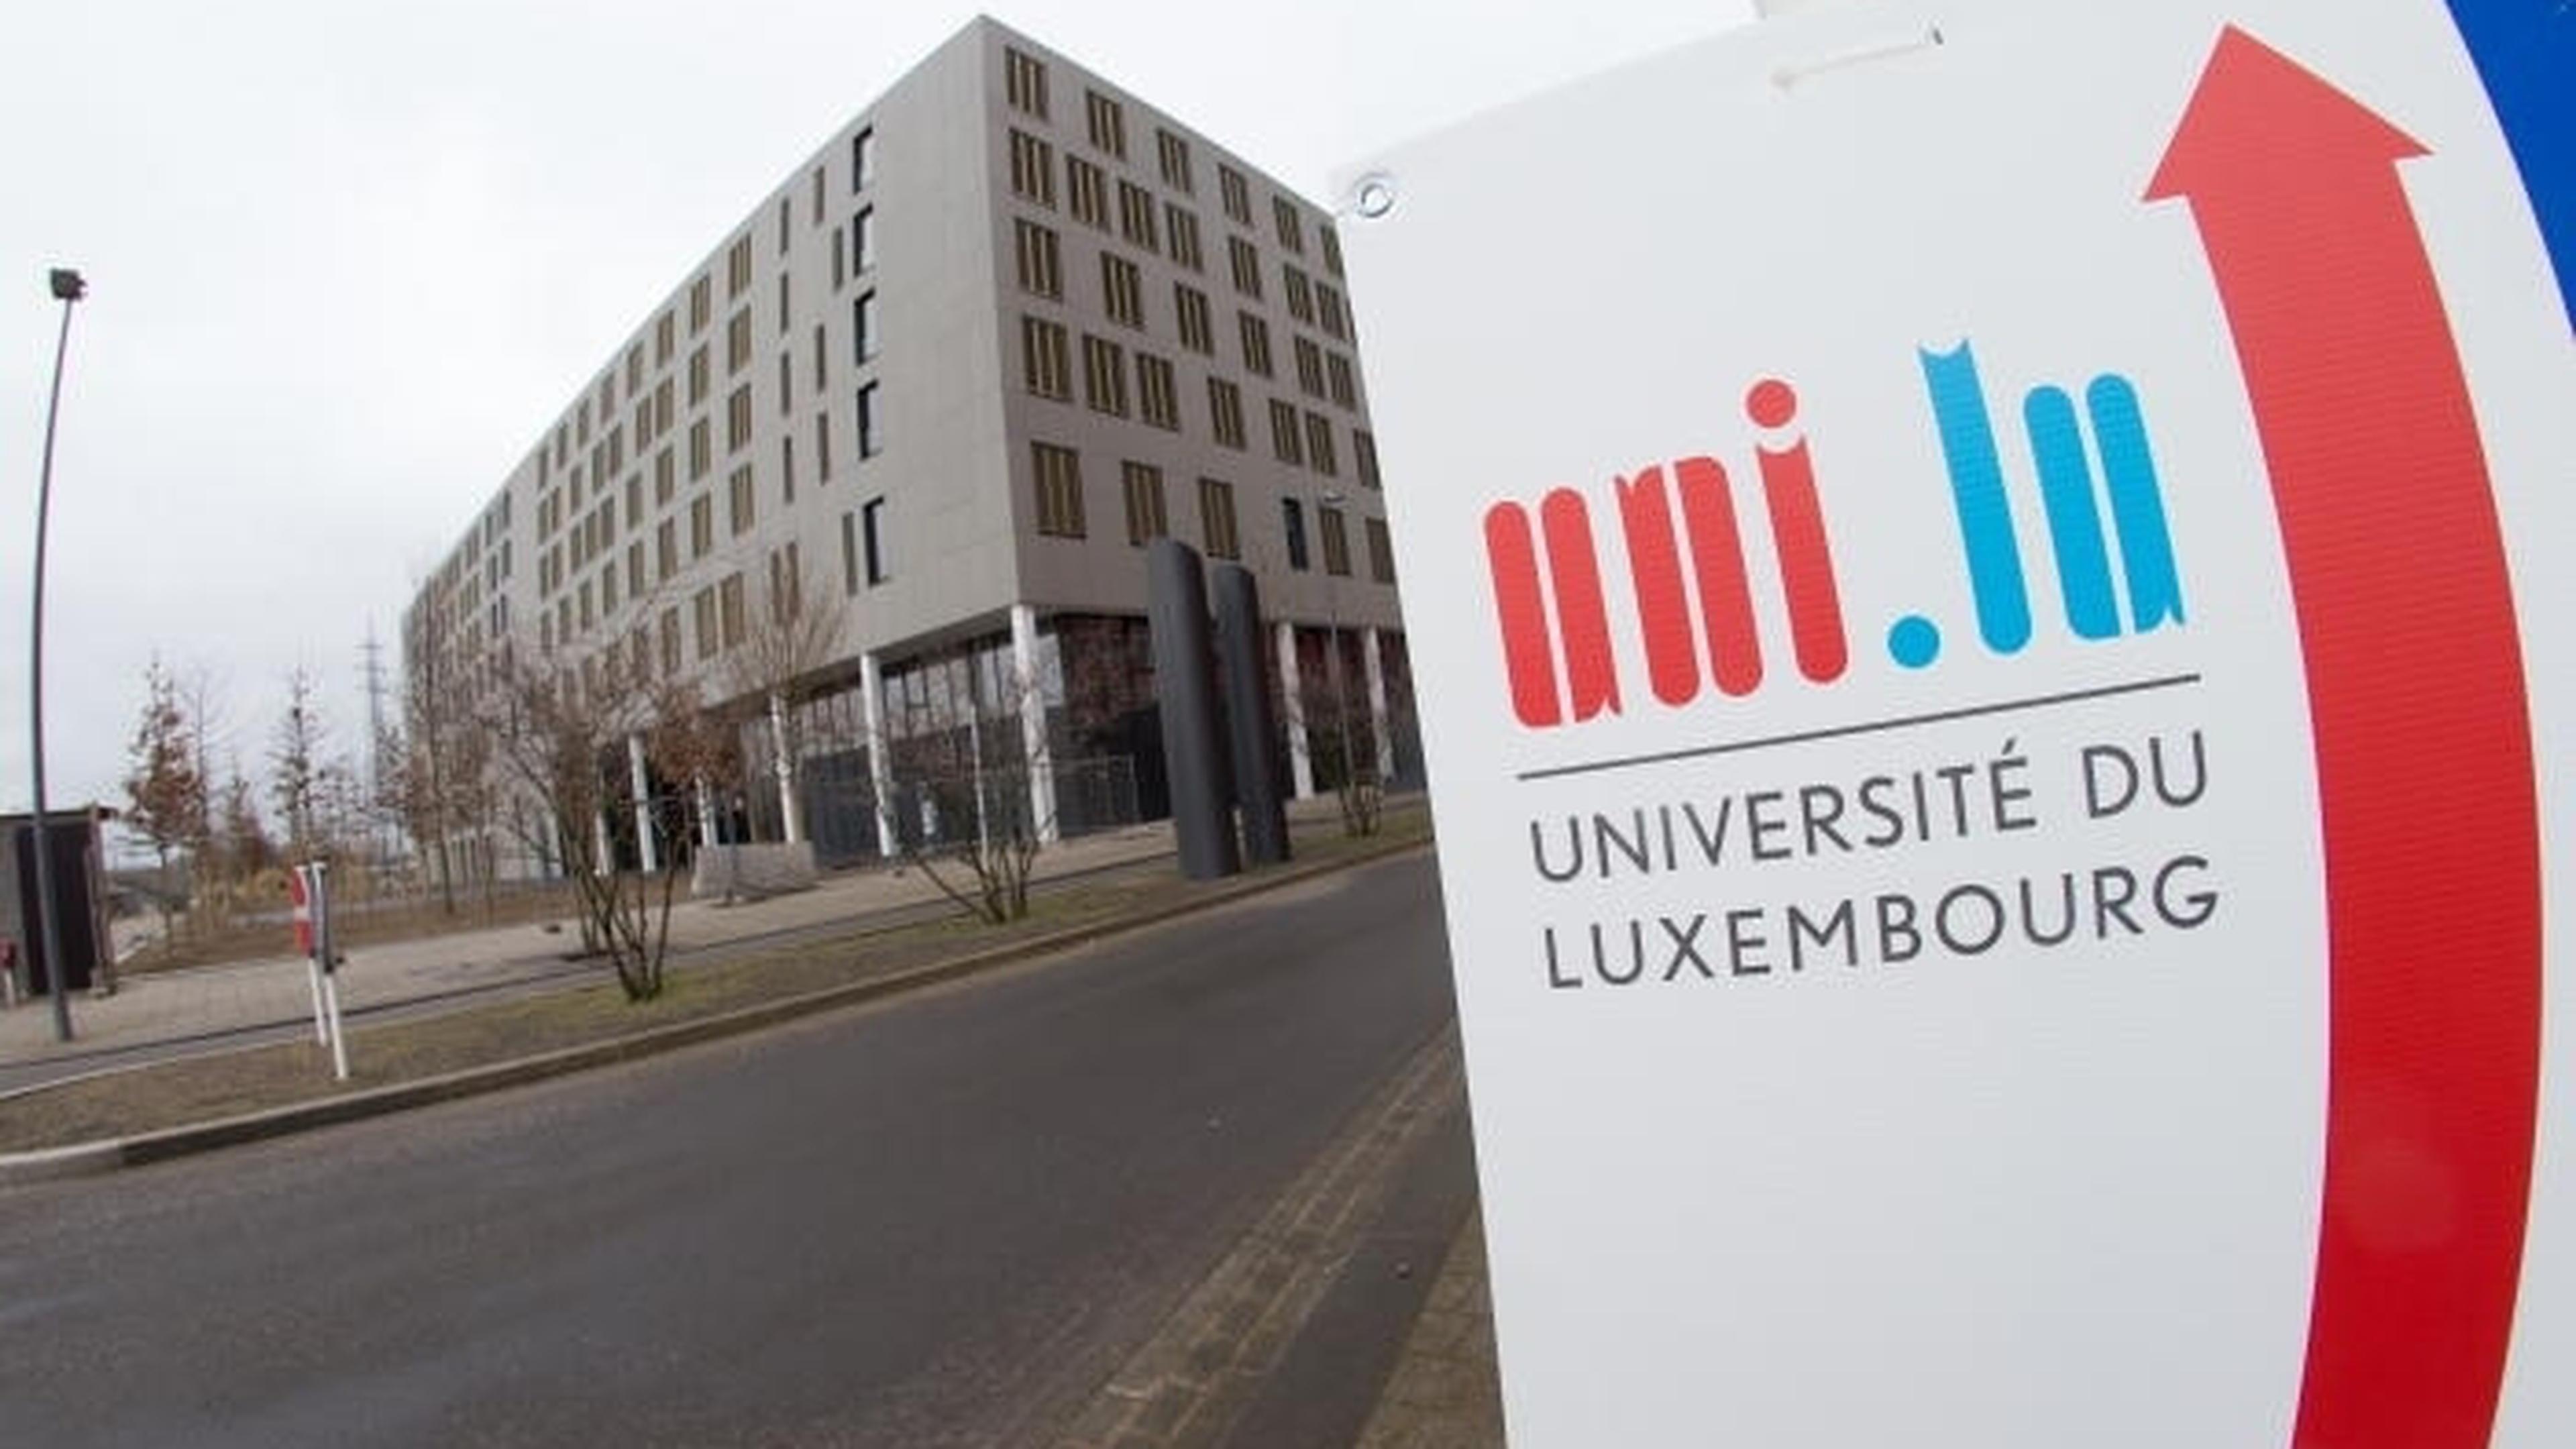 35 bachelor's degrees and 62 master's degrees at the University of Luxembourg.